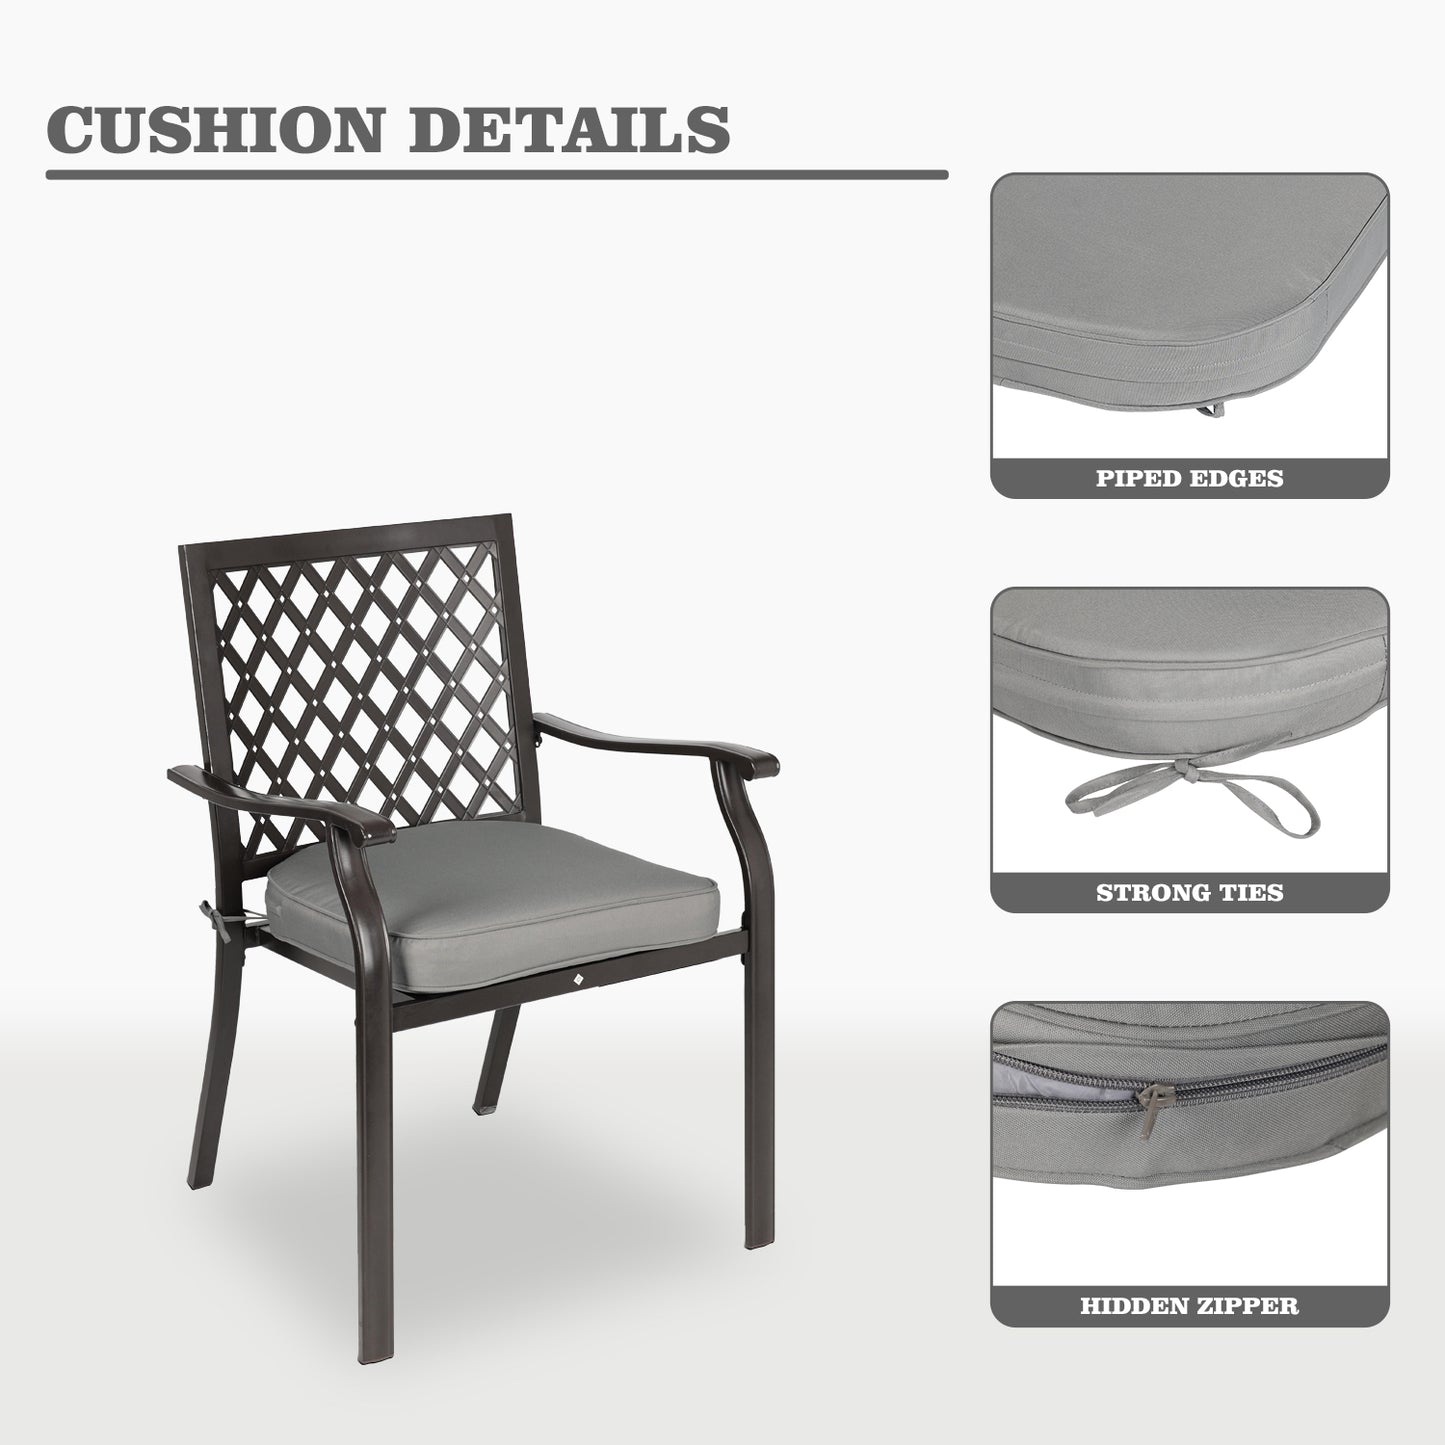 Outdoor Chair Cushion Soft and Fade-resistant Polyester